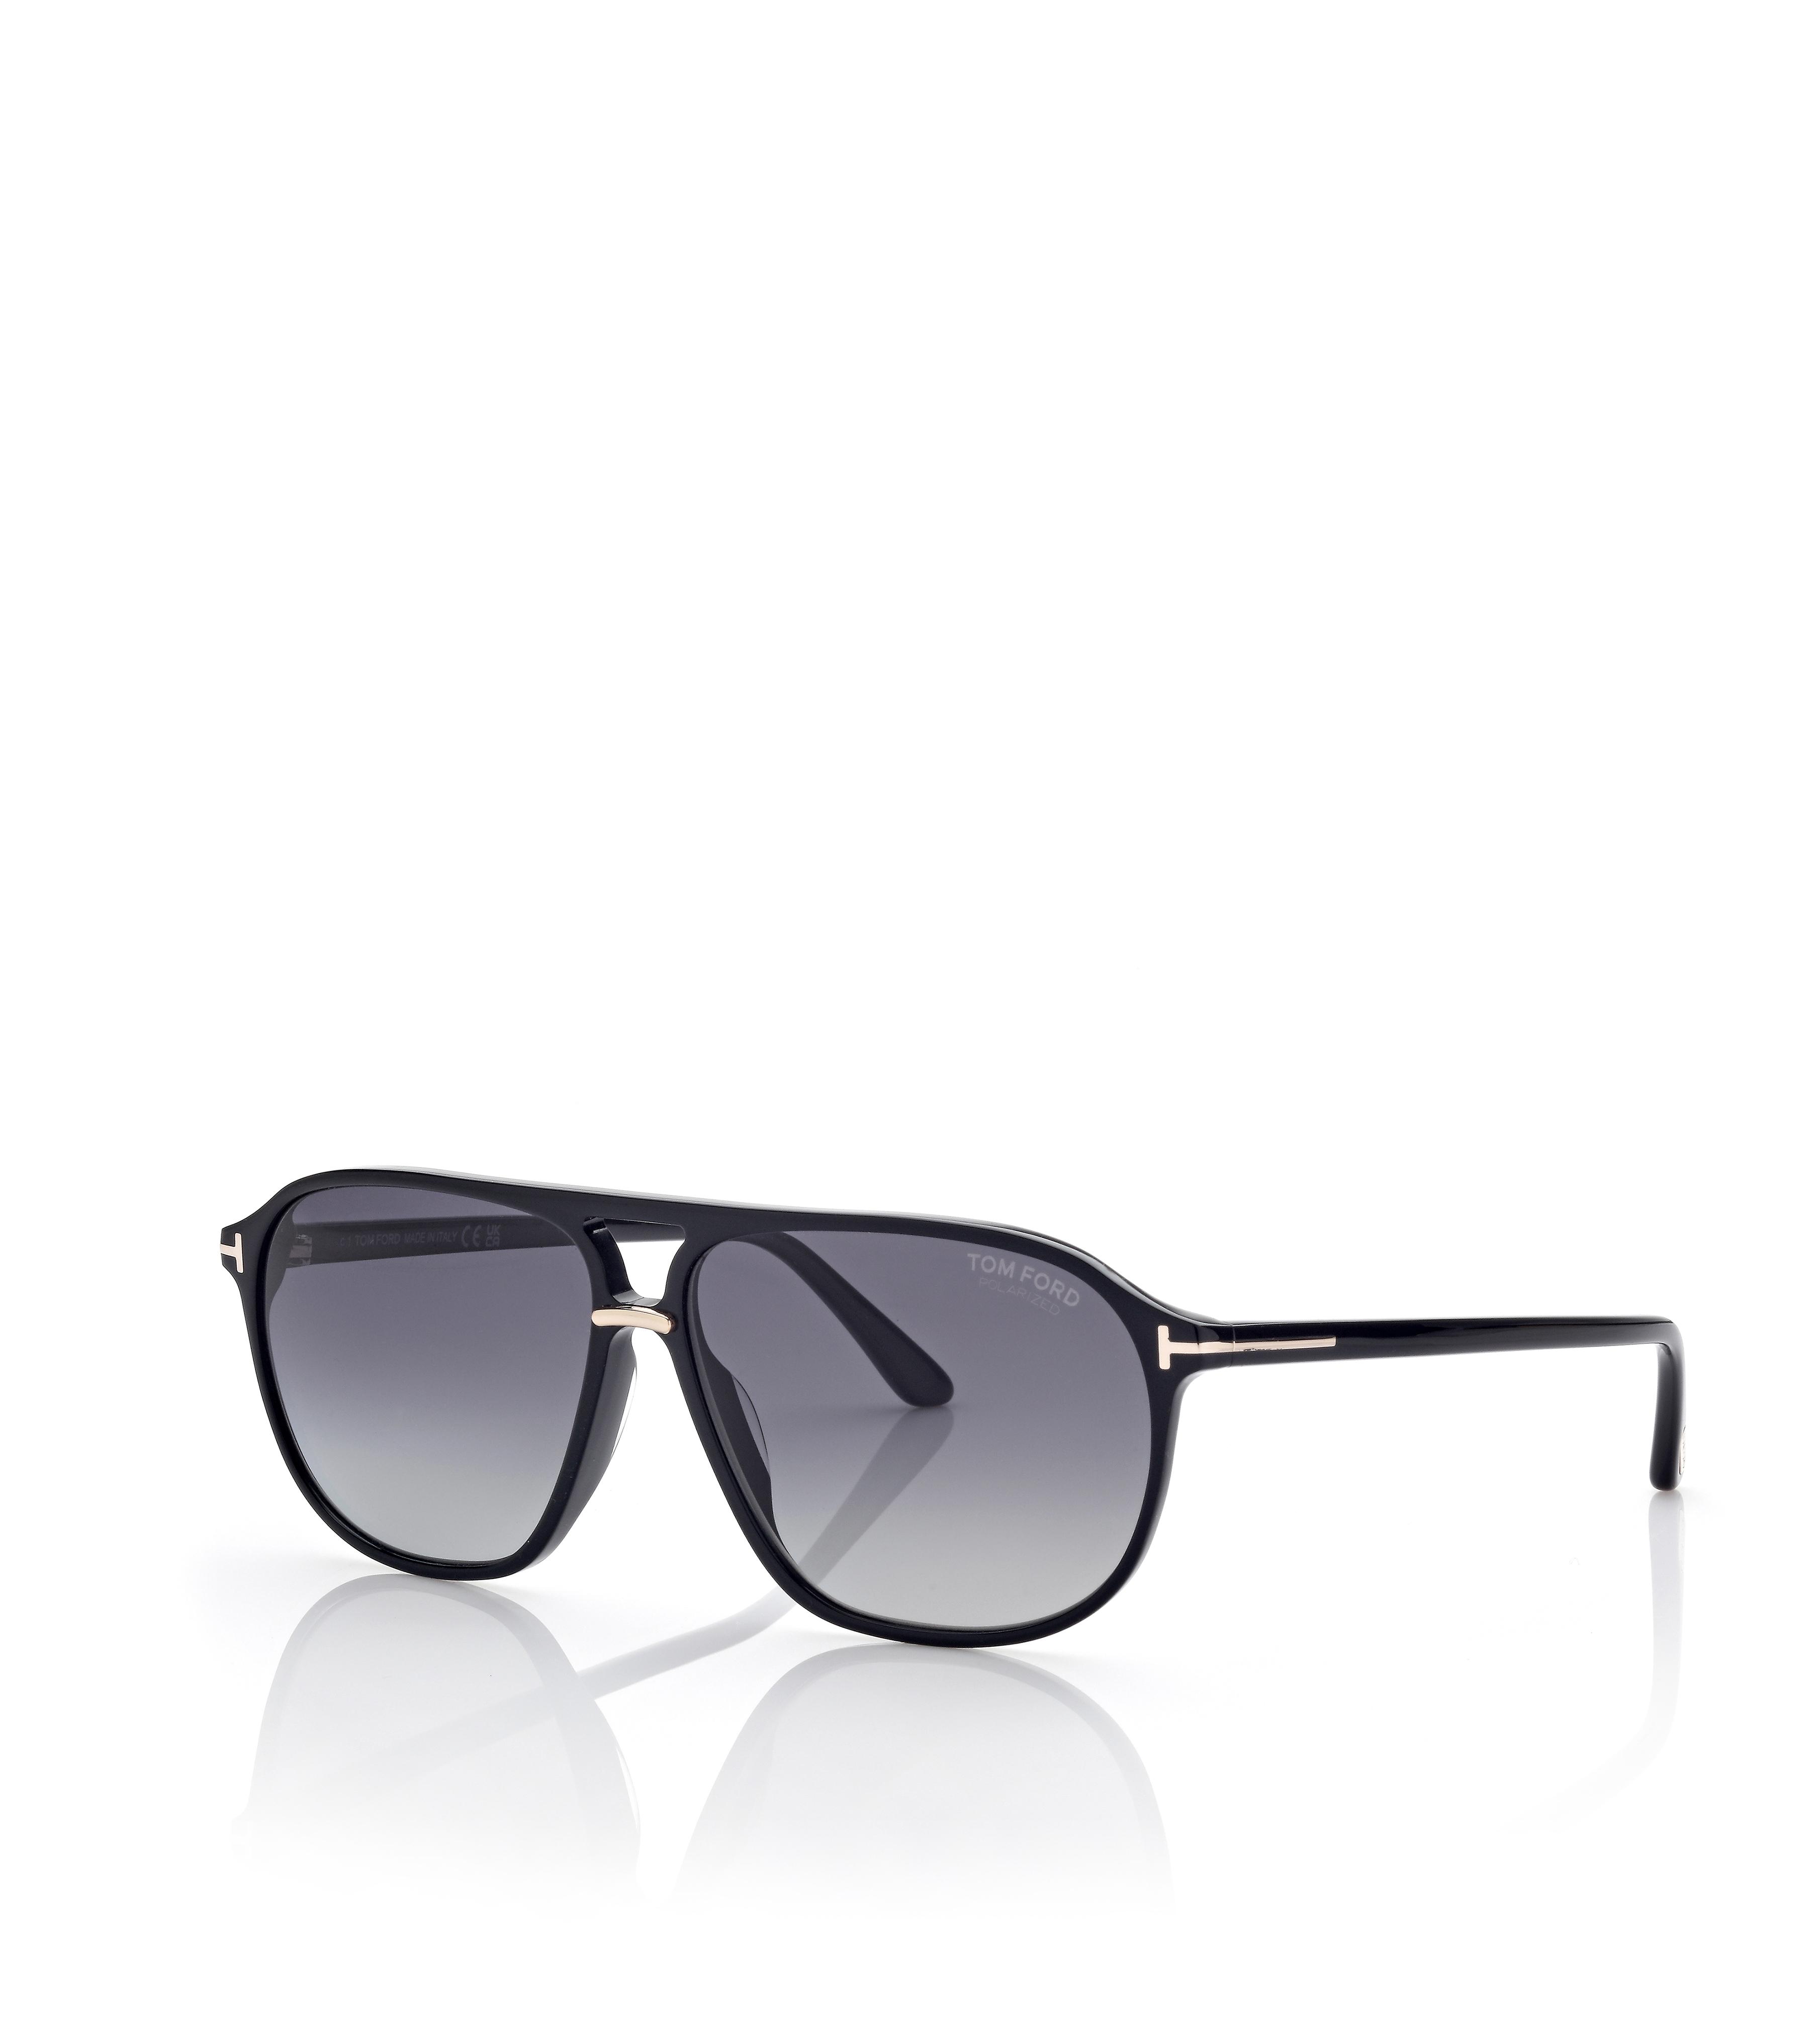 Tom Ford - Double Clip On Optical Glasses - Butterfly Optical Glasses -  Black - FT5643-B - Optical Glasses - Tom Ford Eyewear - Avvenice